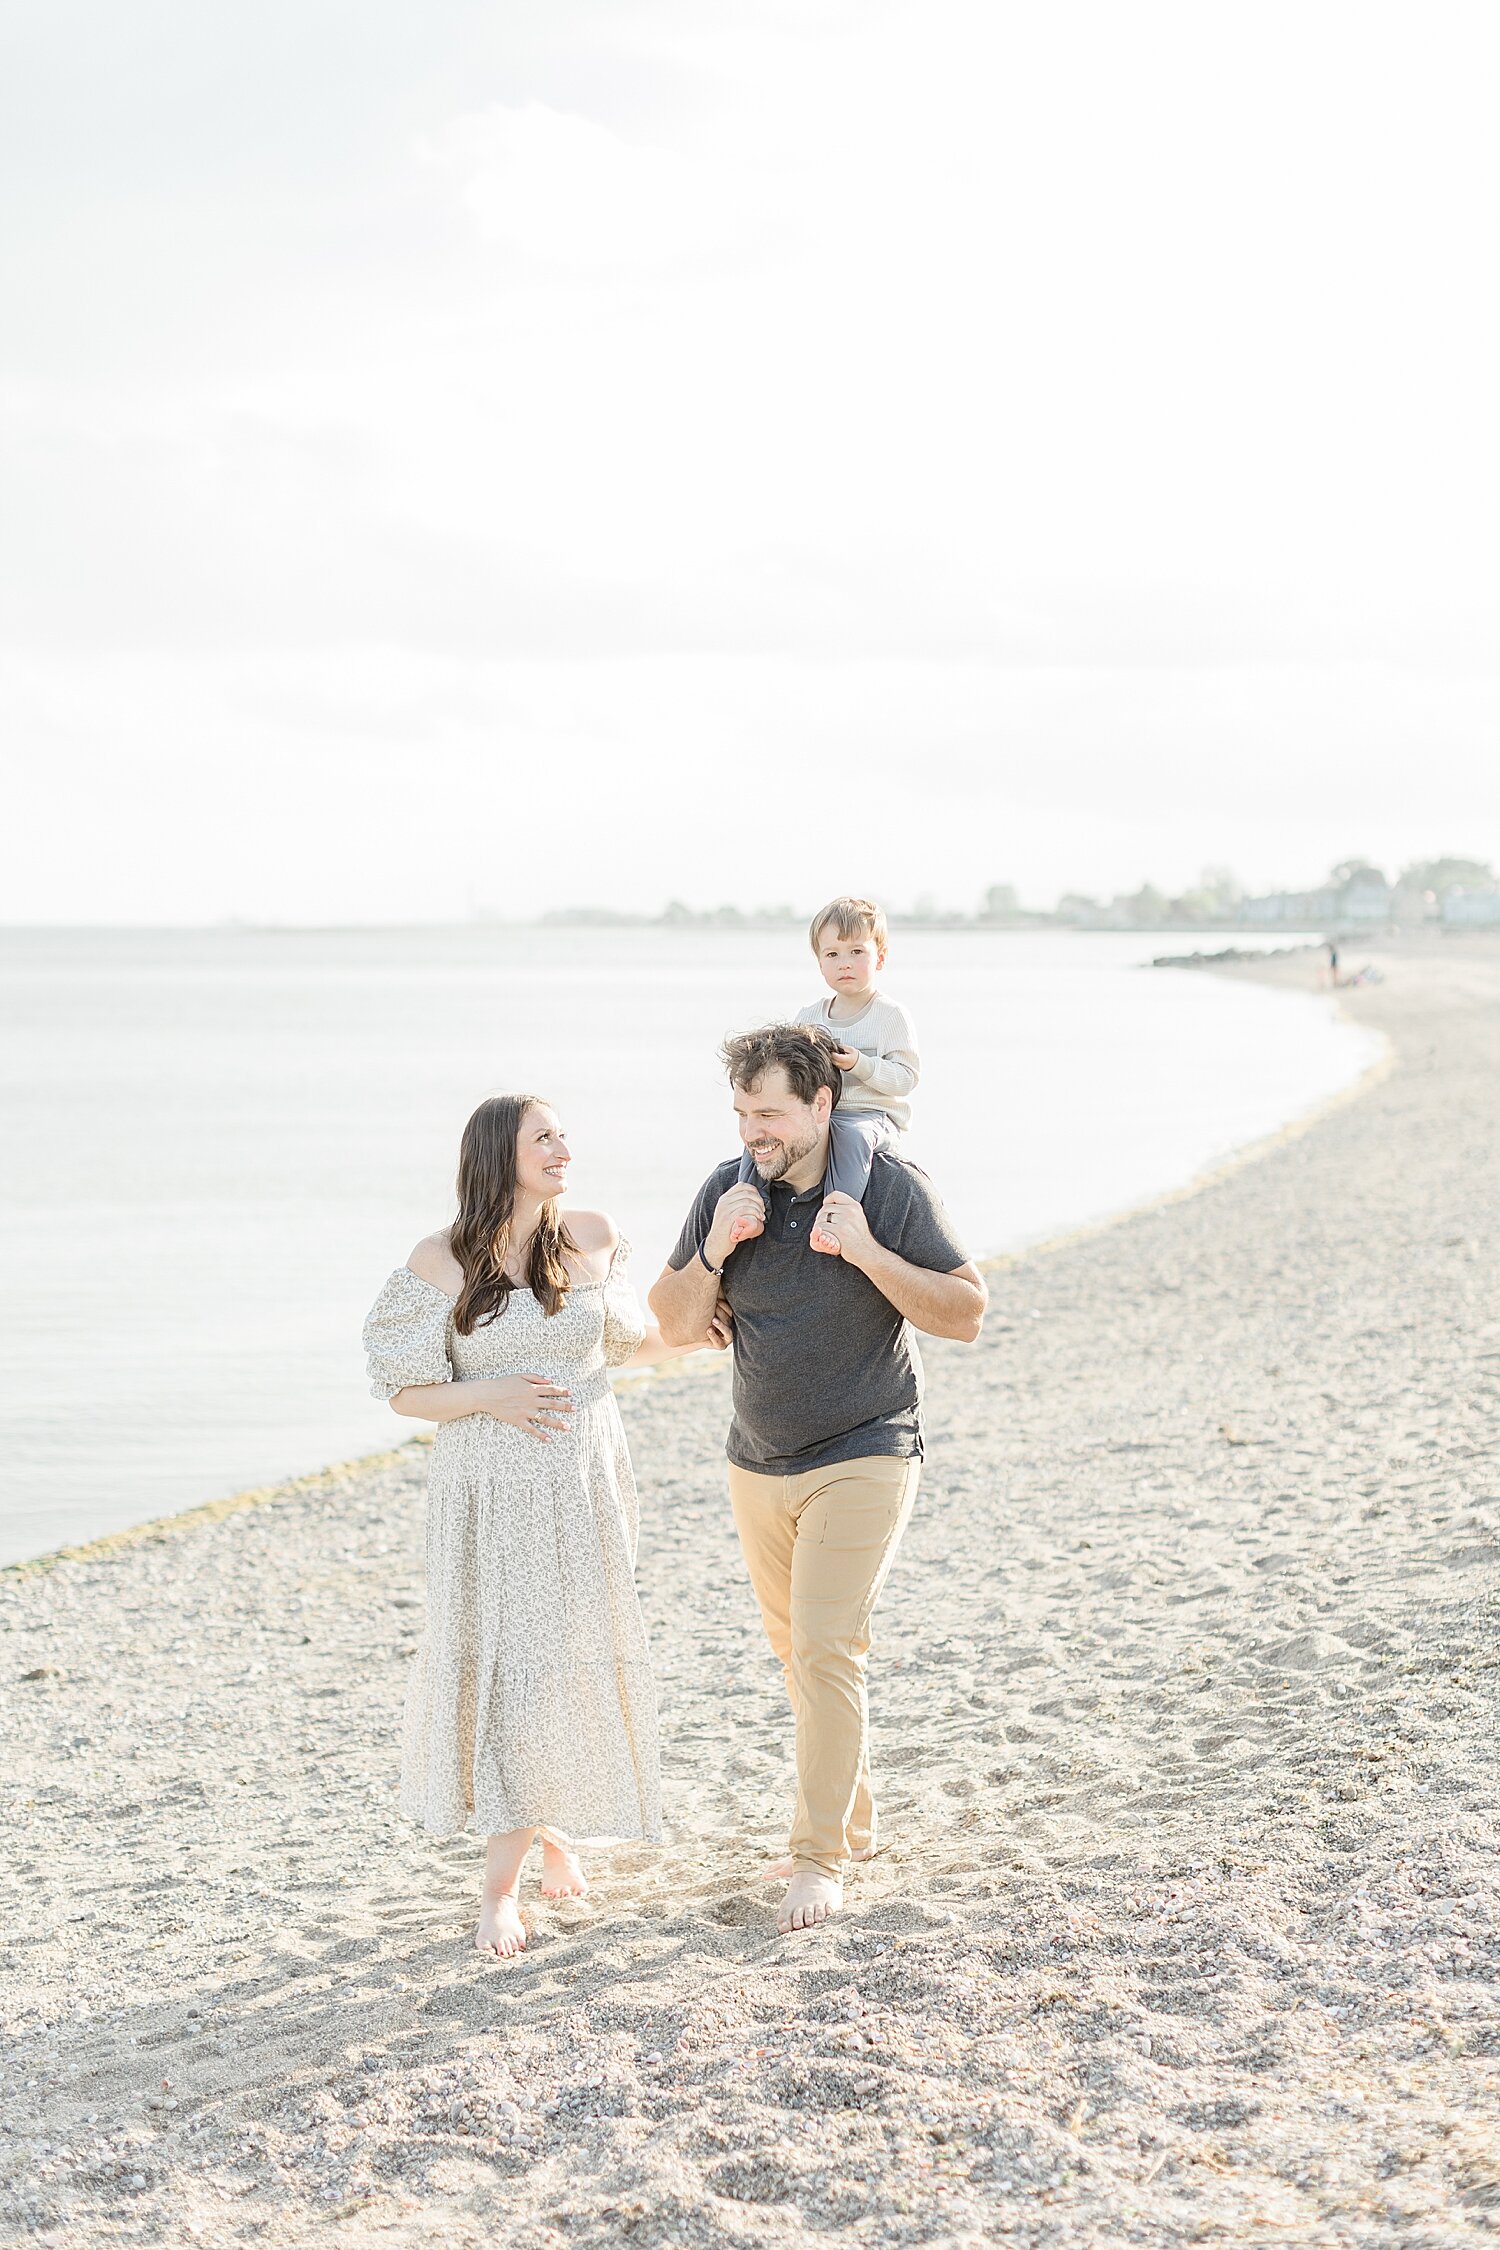 Mom and Dad walking down the beach with son on Dad's shoulders. Photo by Kristin Wood Photography.